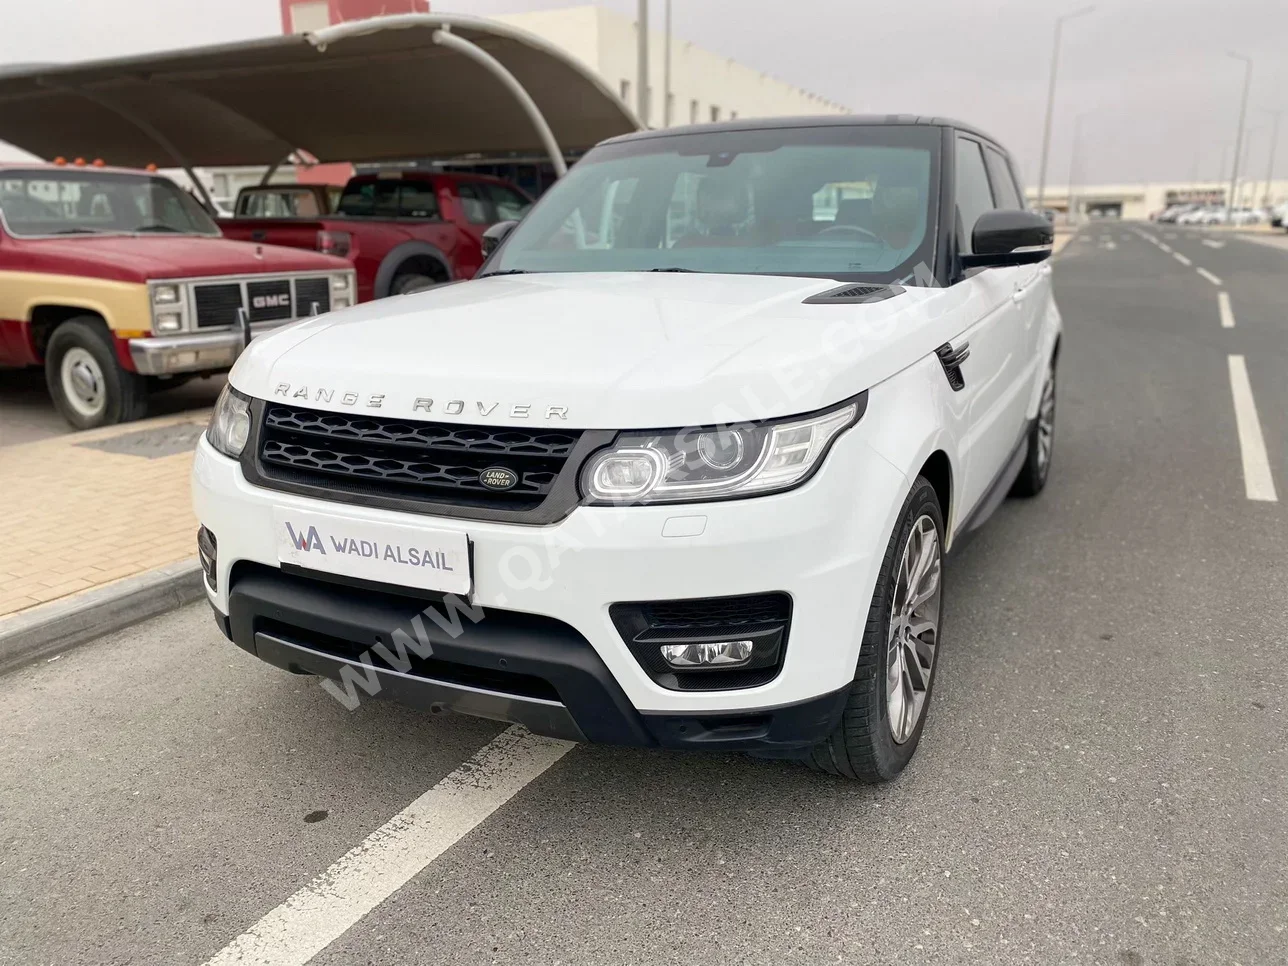 Land Rover  Range Rover  Sport  2016  Automatic  110,000 Km  8 Cylinder  Four Wheel Drive (4WD)  SUV  White